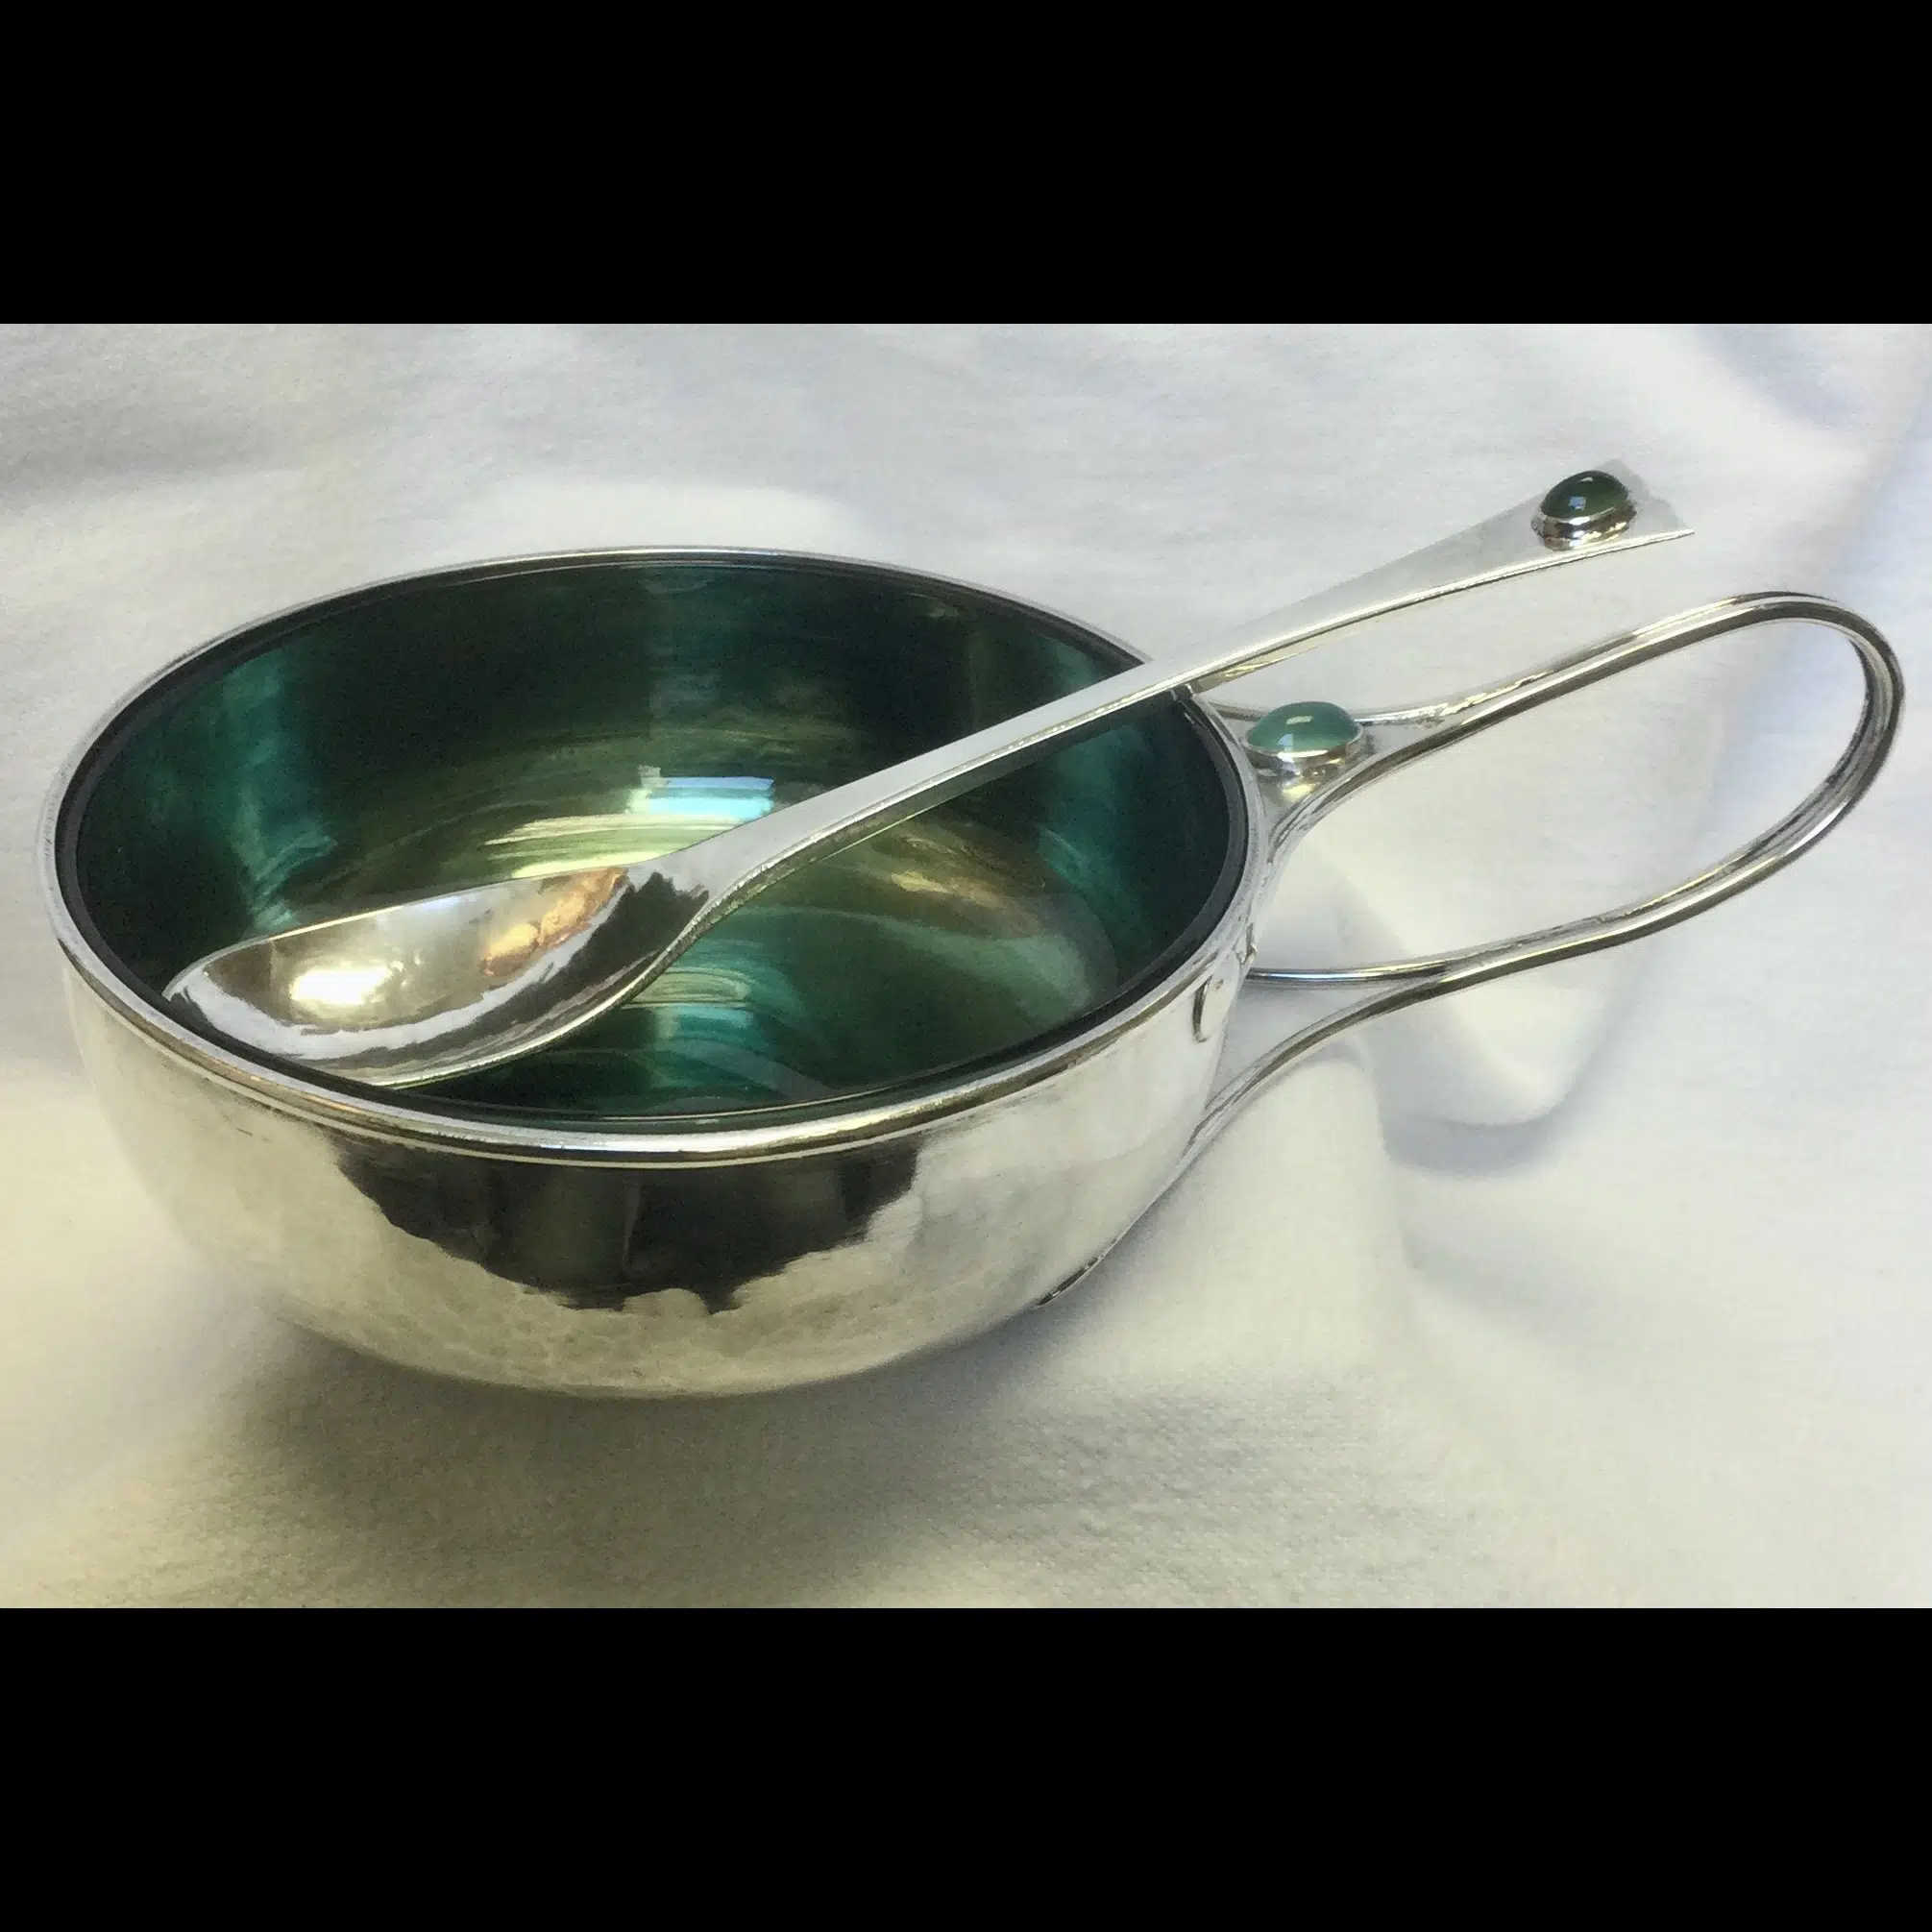 c.r.ashbee guild of handicrafts gofh silver porringer spoon and liner with cabochons 1908